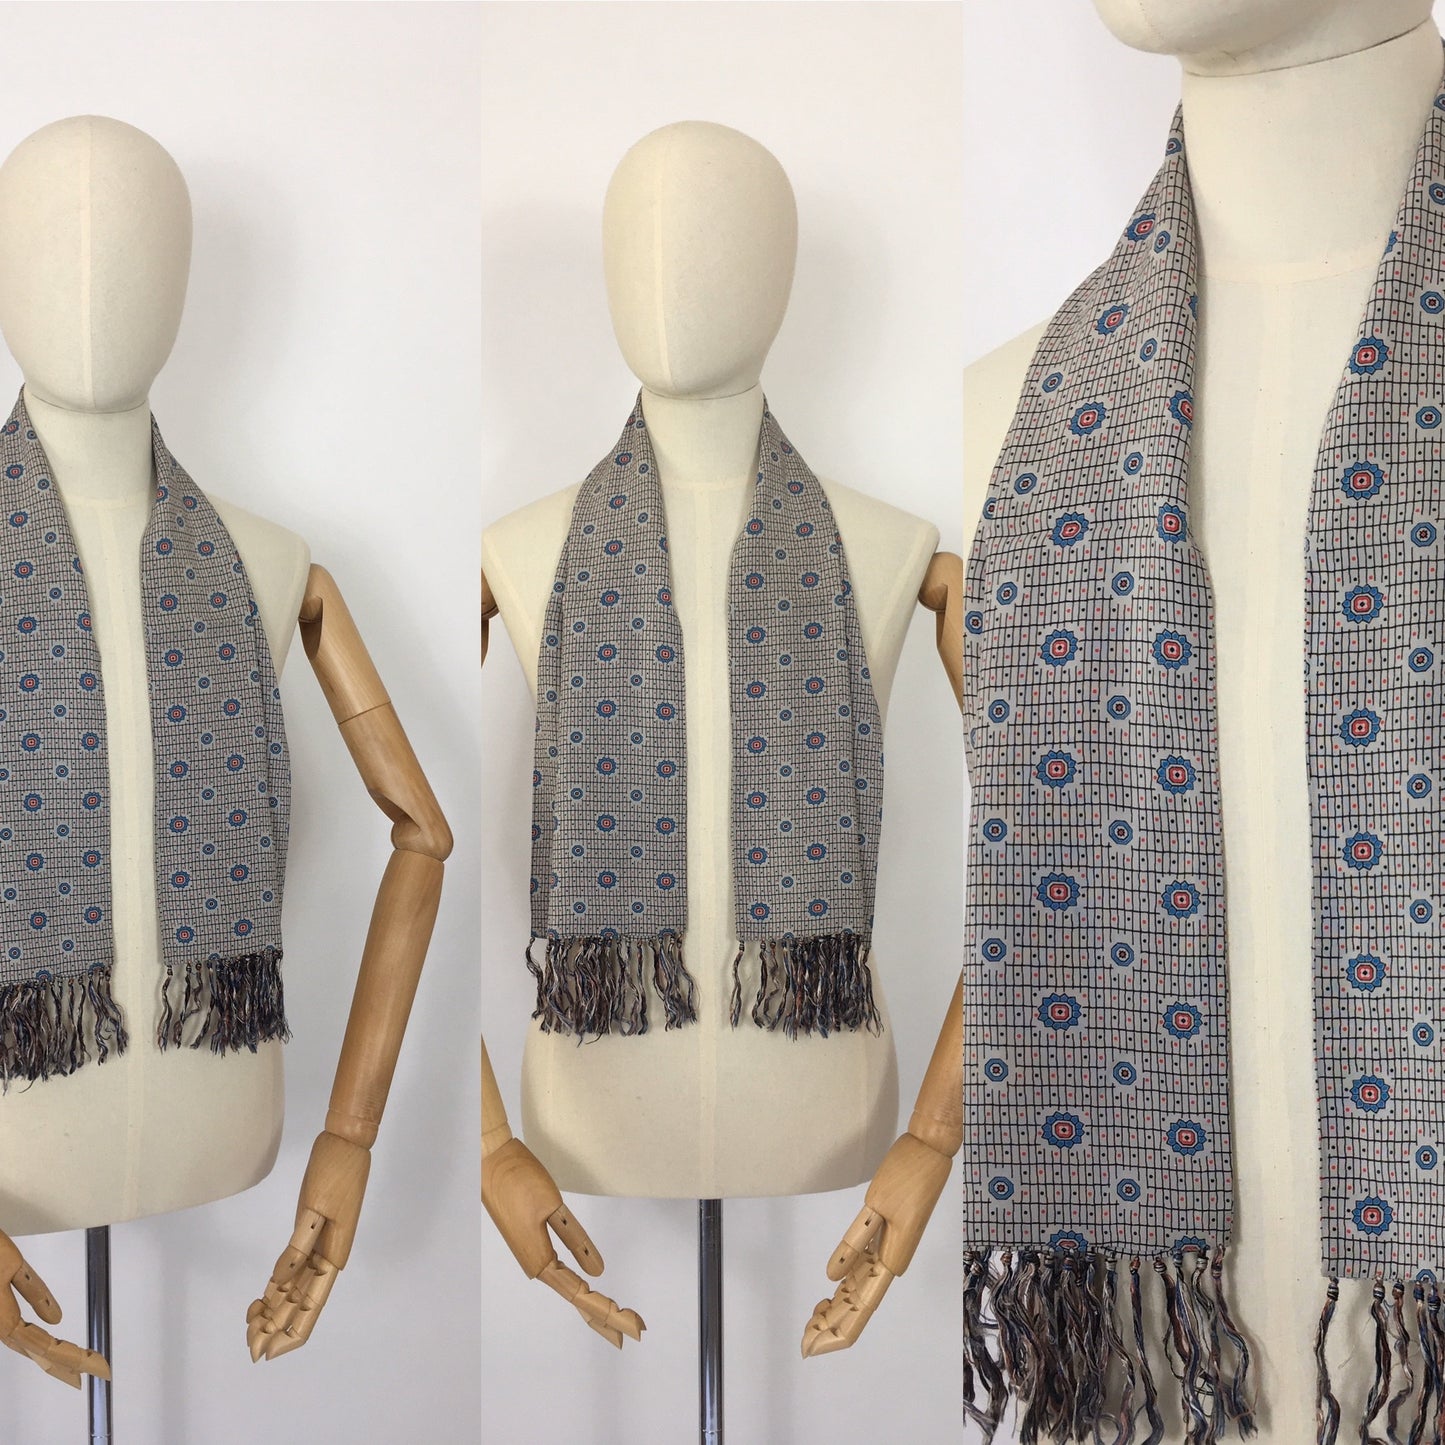 Original Late 1940’s Mens Scarf - Geometric Print in Greys, Blues and Reds